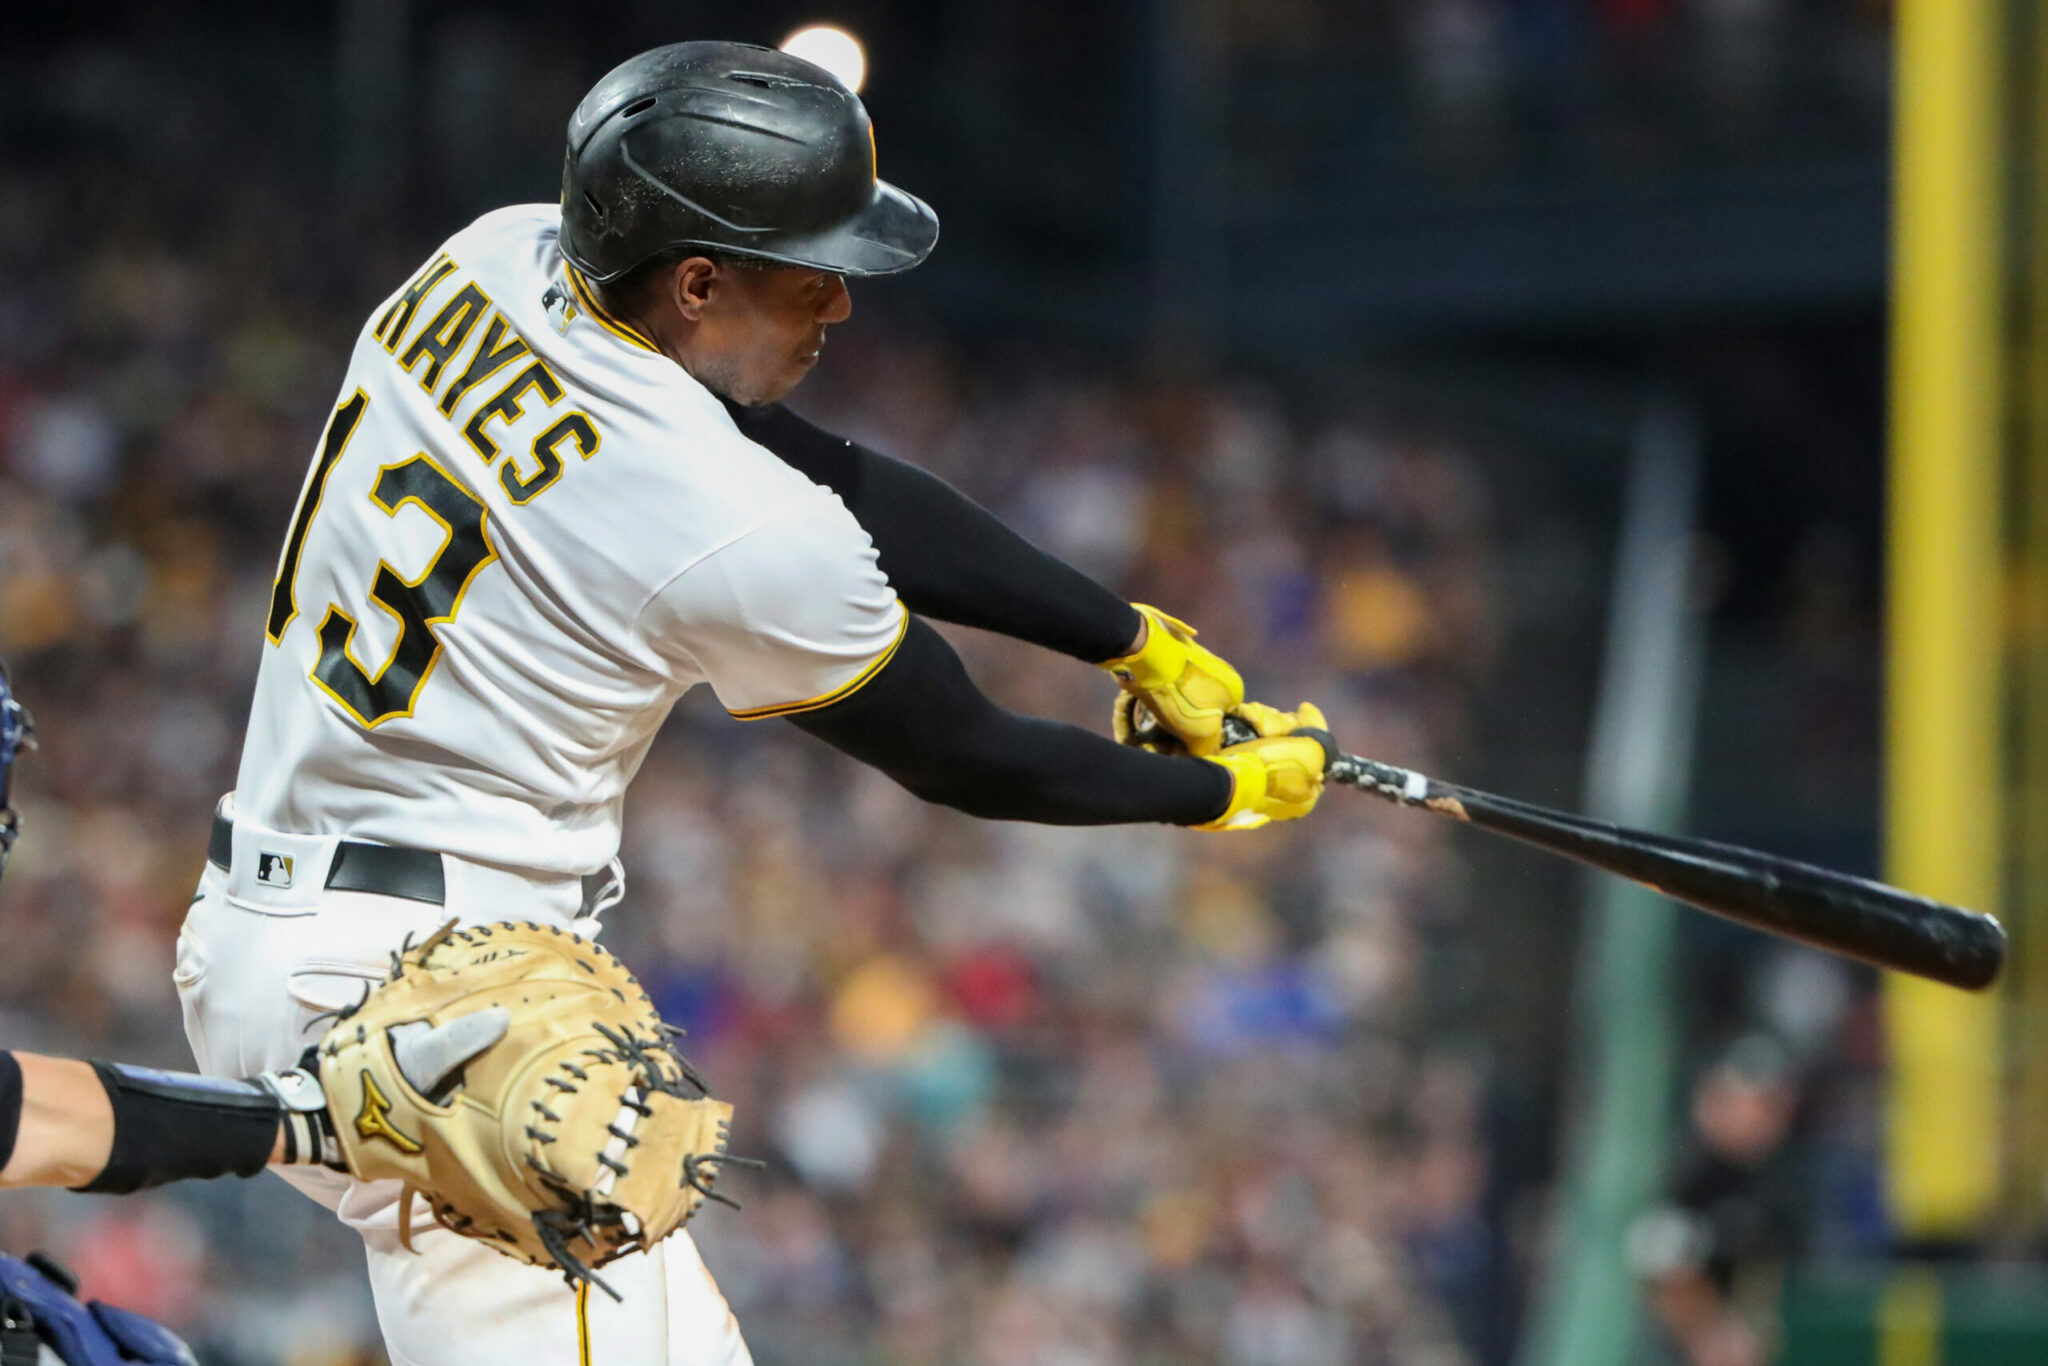 Pirates Prospects Daily: How Much Has The Pirates Lineup Improved?